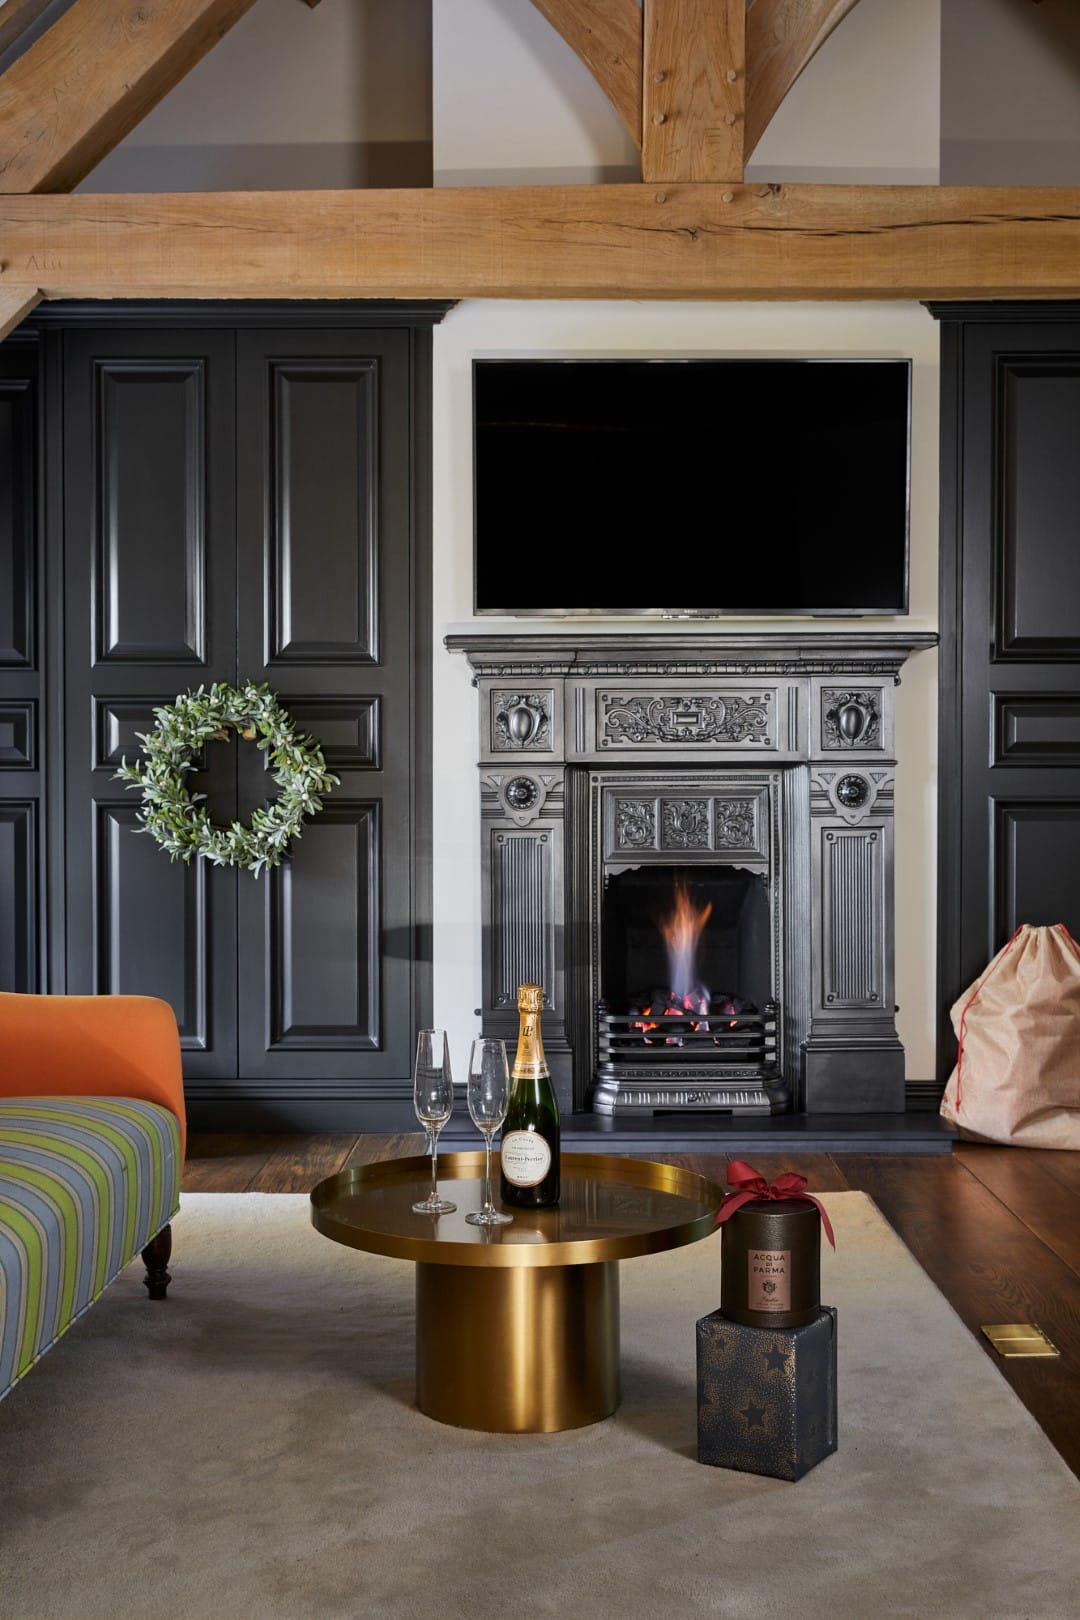 Warm and cosy atmosphere of a classic fireplace design